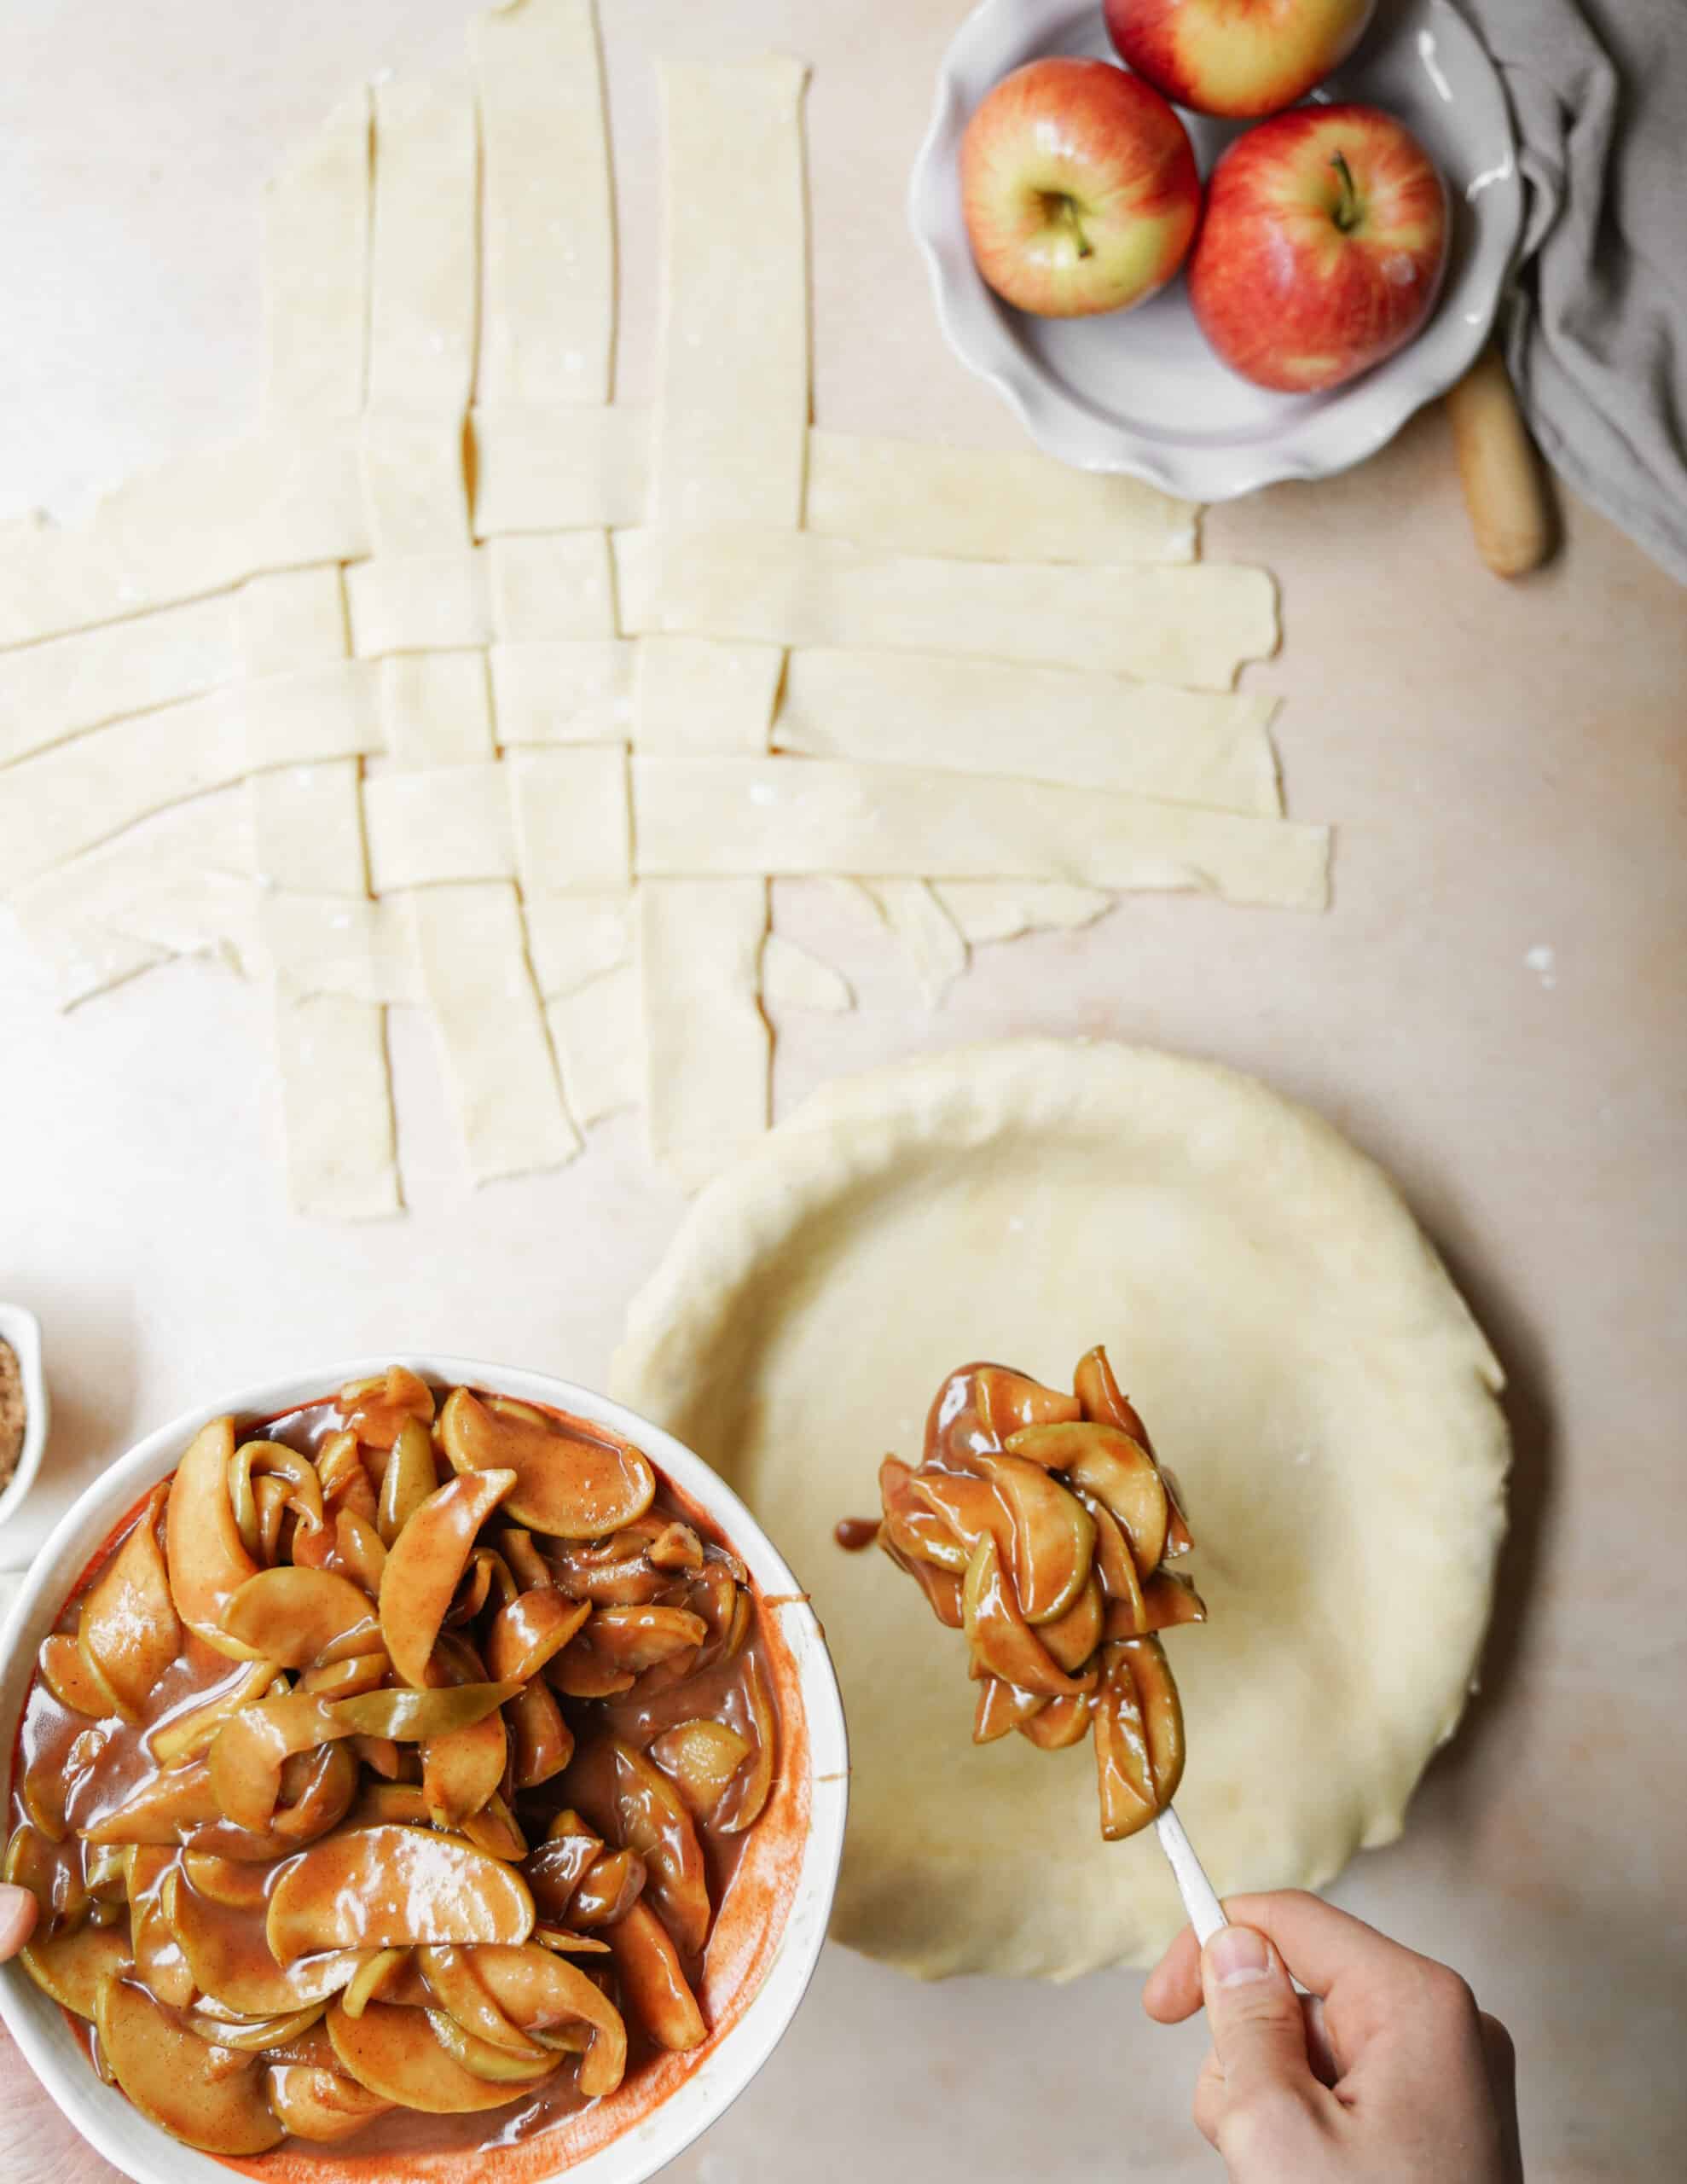 Apple pie filling being added to pie with latticework in the background